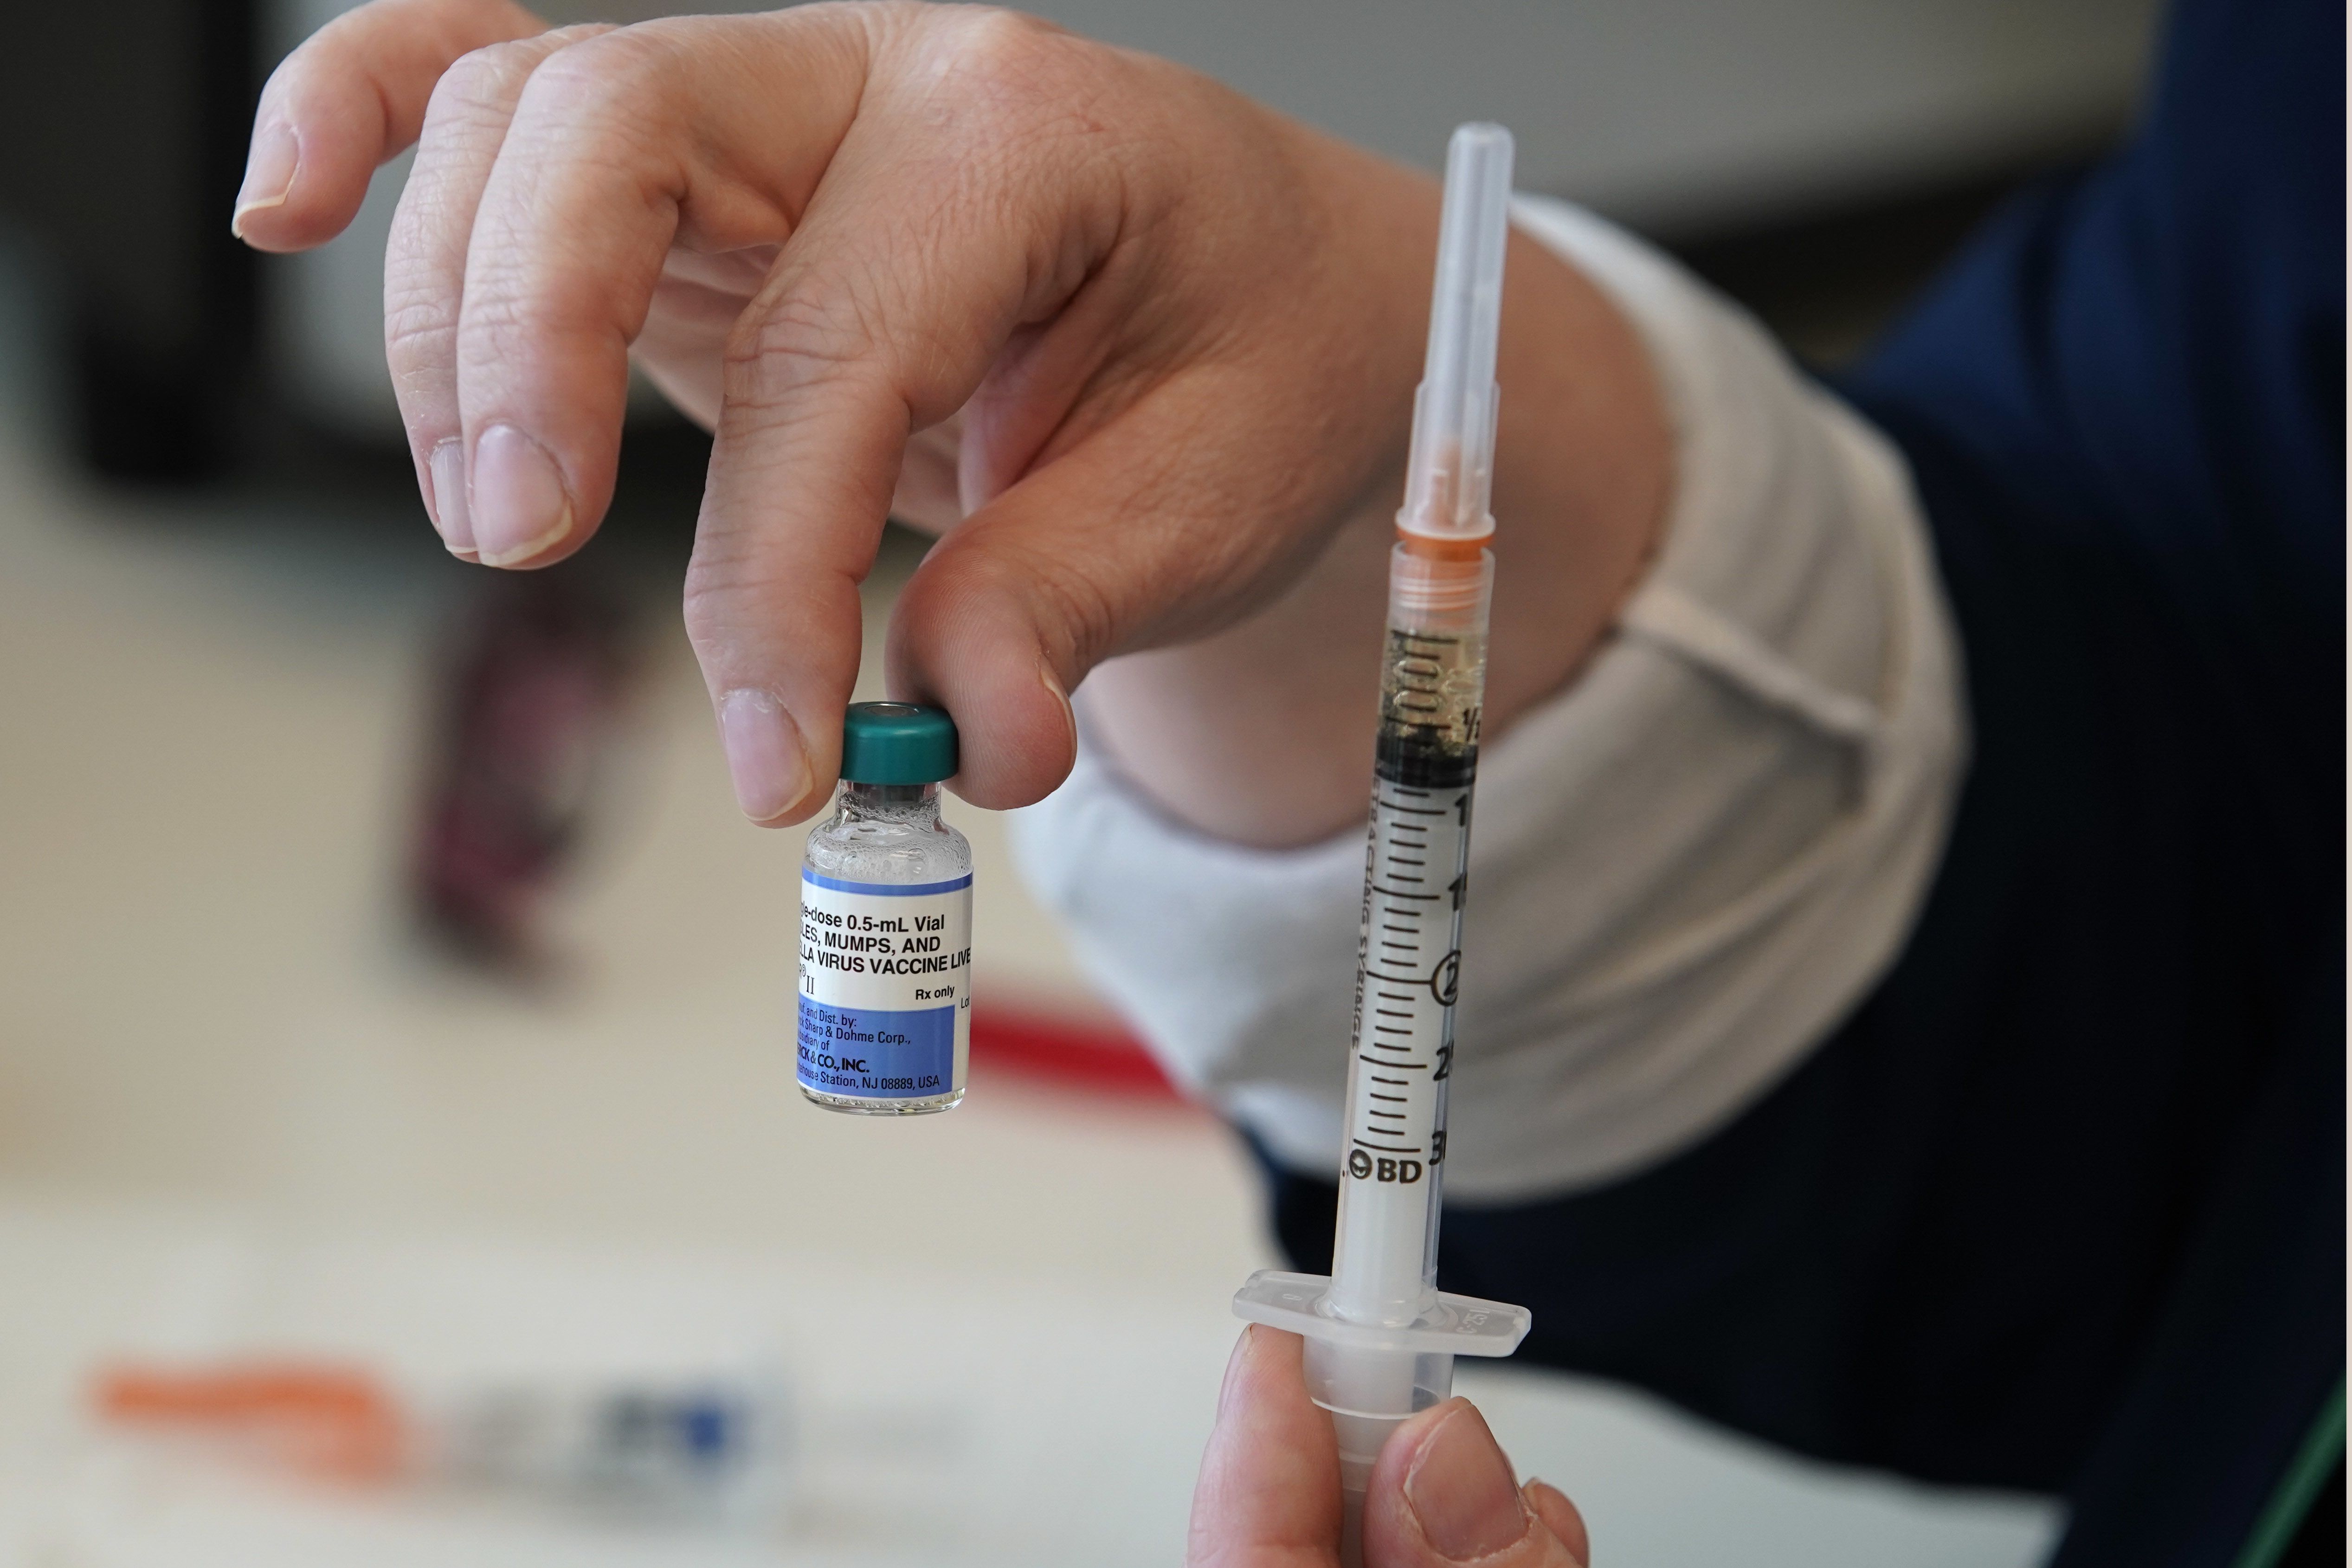 CDC warns US could lose measles elimination status if outbreak worsens